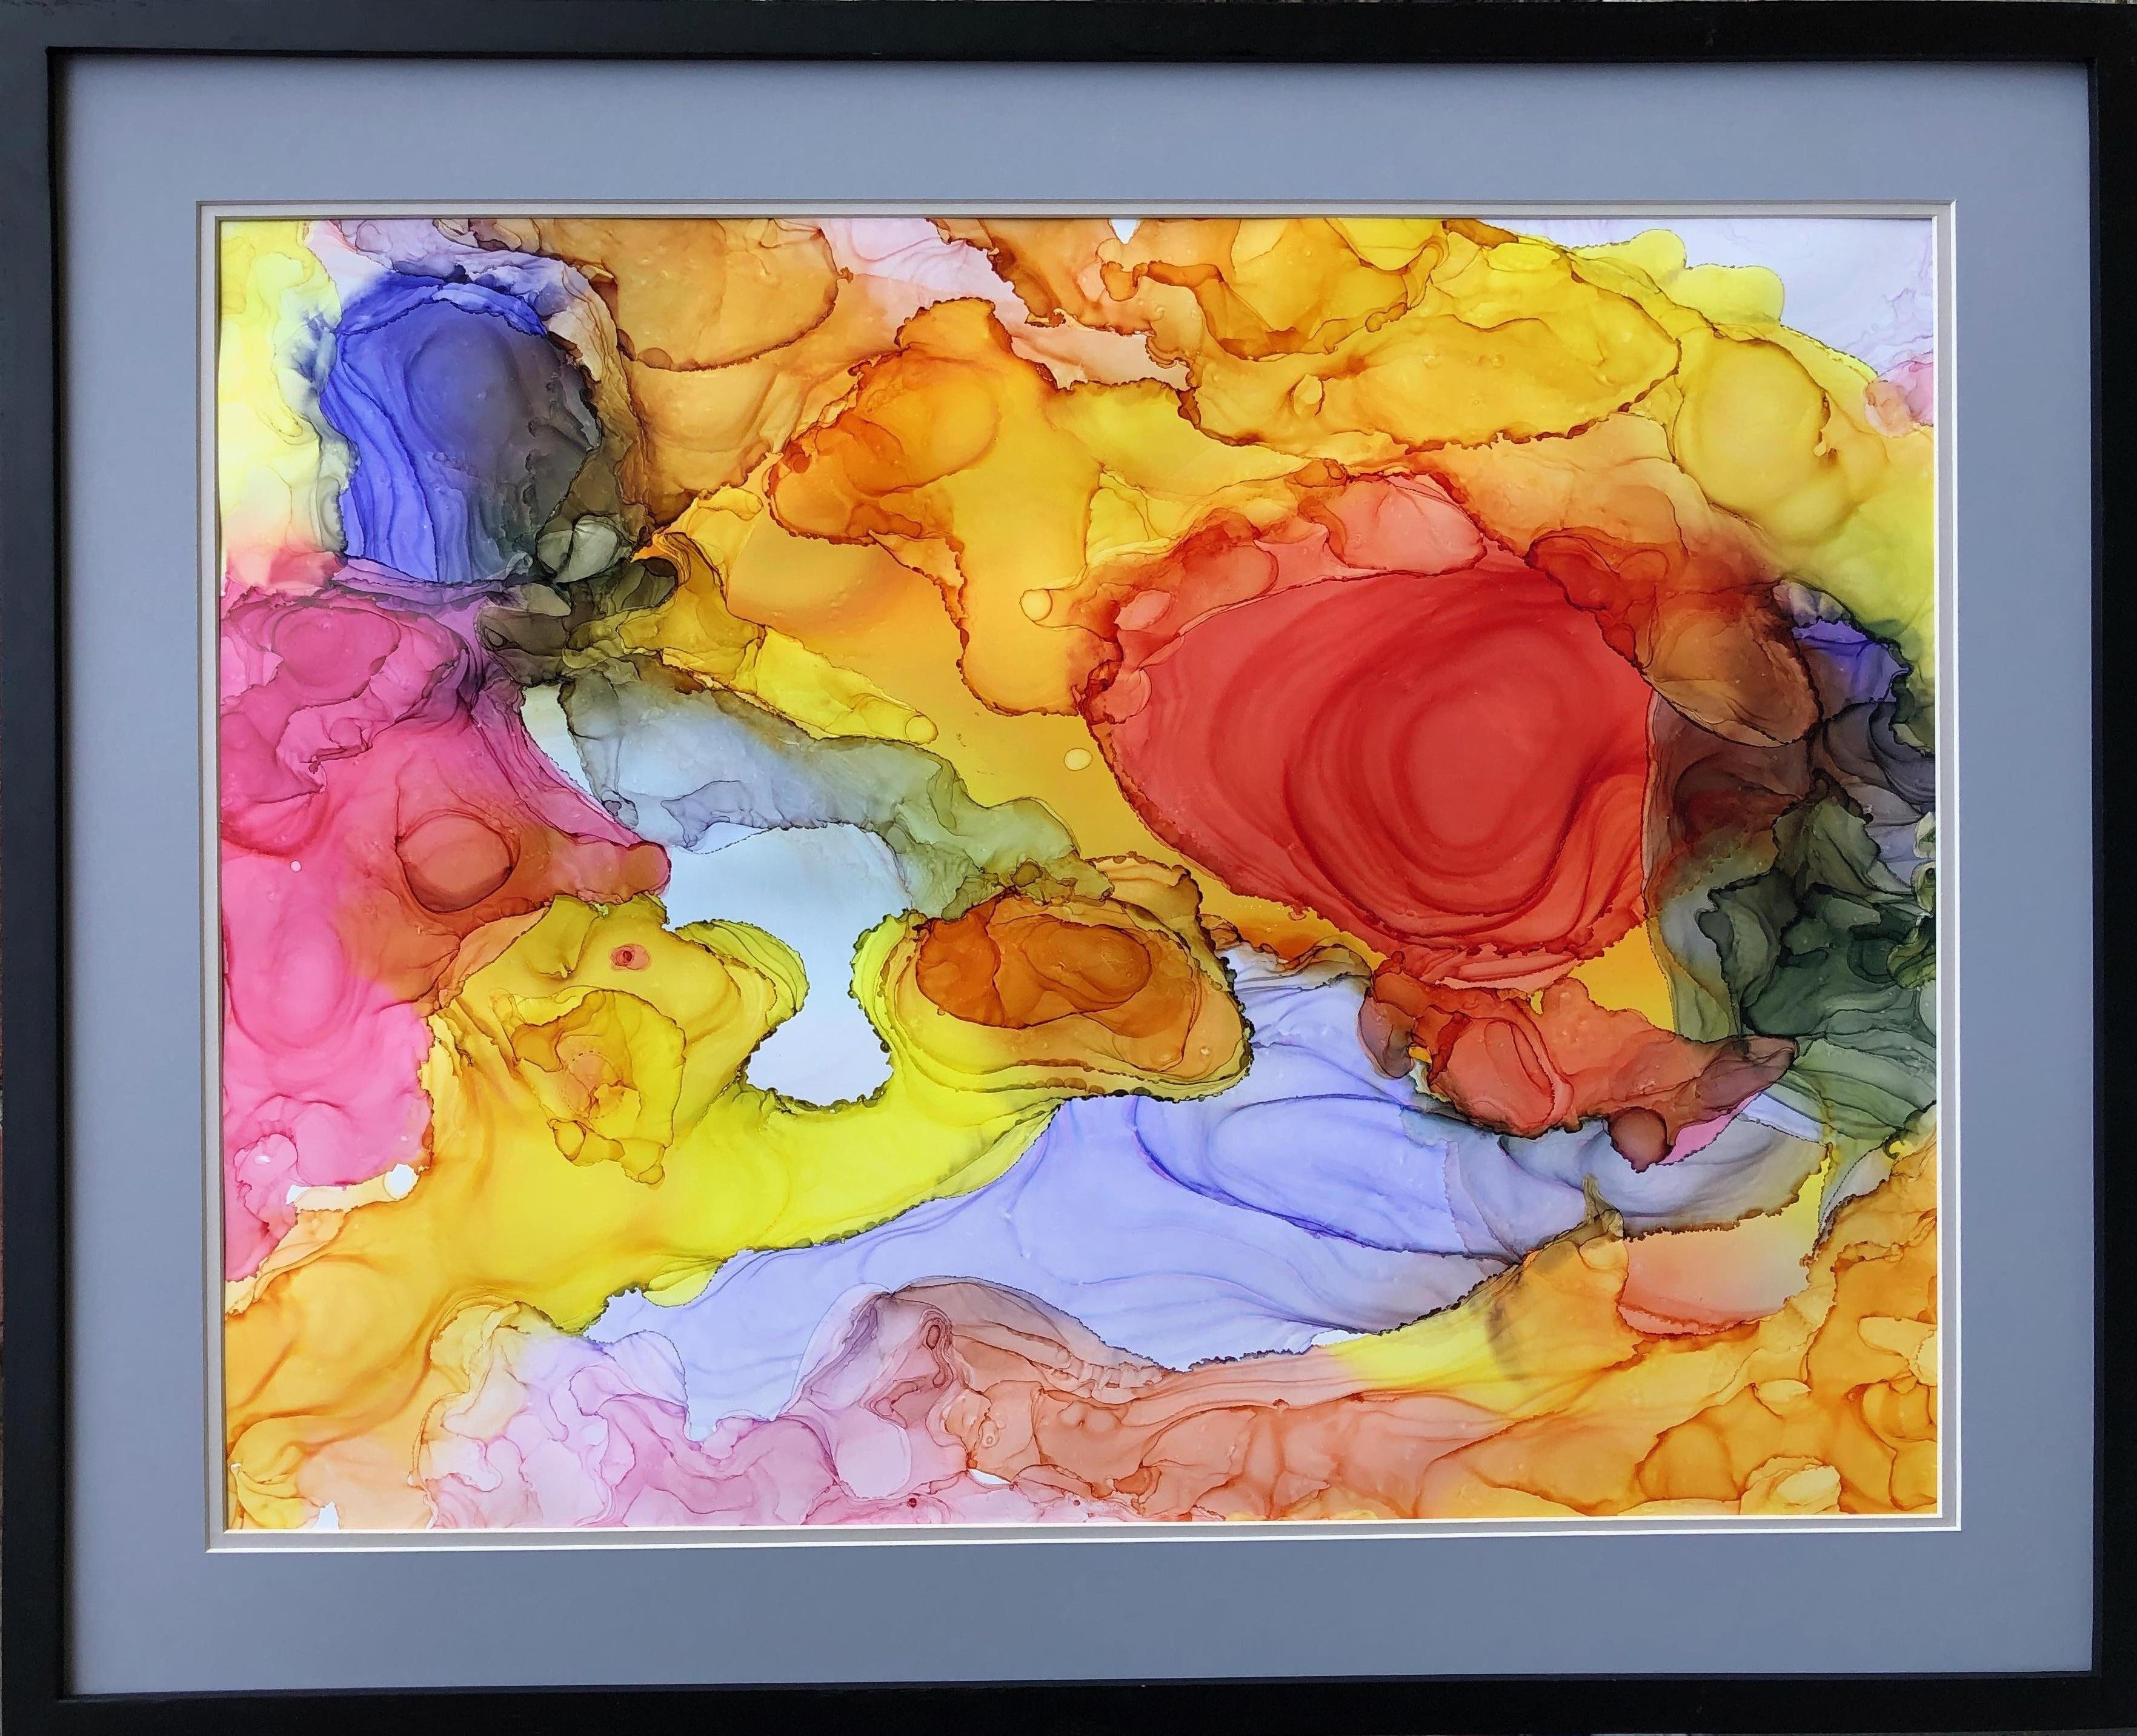 Interior design paintings. The work was done with alcohol ink in orange, yellow, red, blue, pink and green color on Yupo paper. The work is 20 by 26 inches in size, framed in fine-quality solid wood with a styrene face on a double mat board in pale